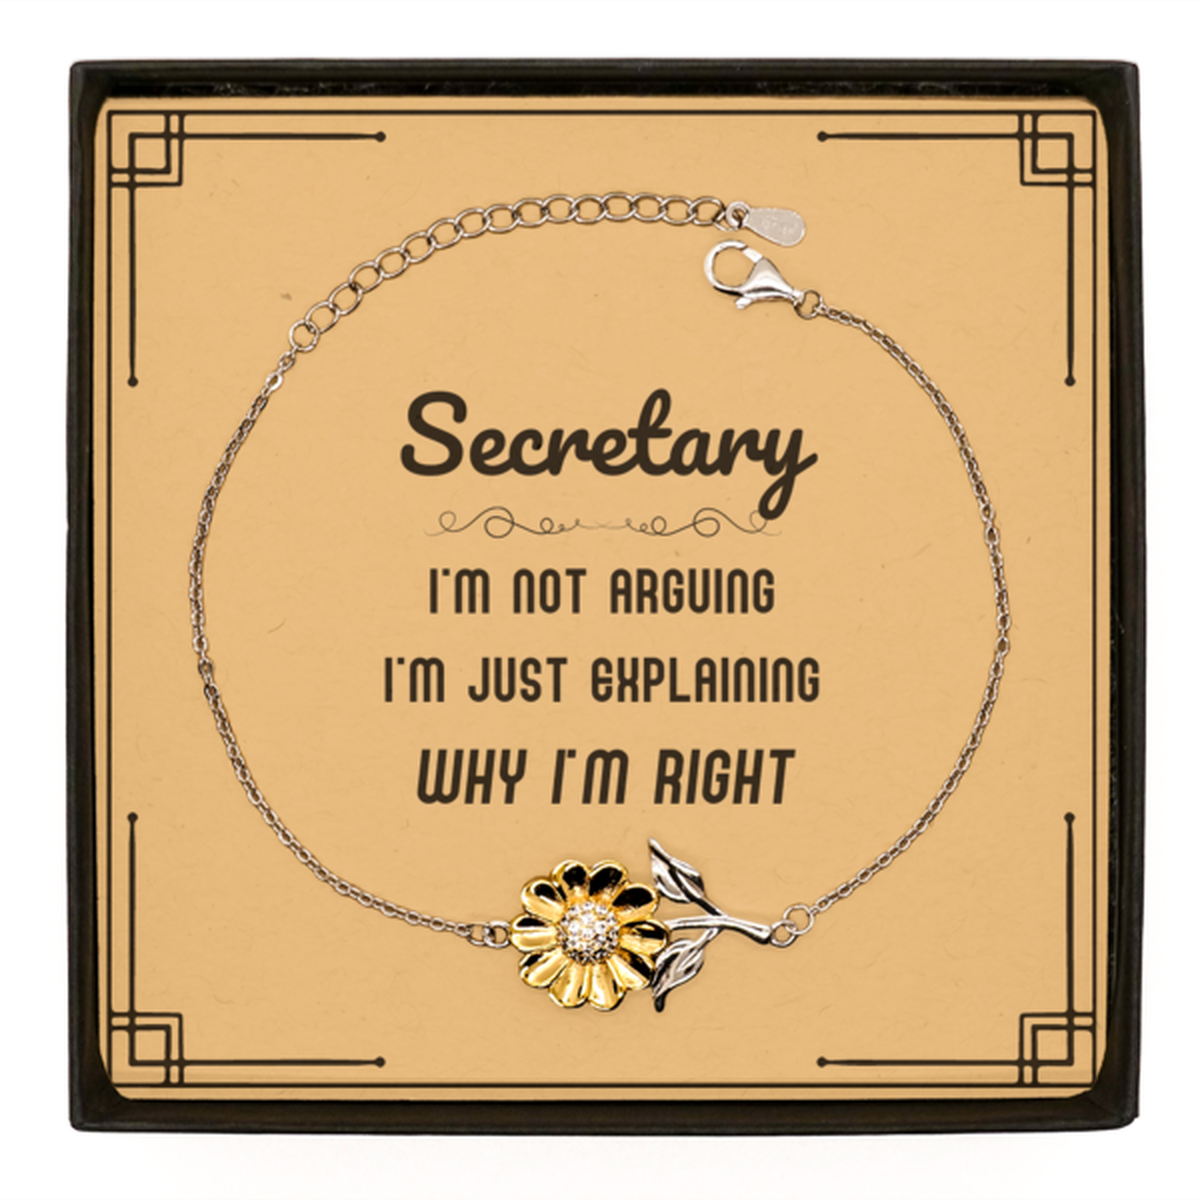 Secretary I'm not Arguing. I'm Just Explaining Why I'm RIGHT Sunflower Bracelet, Funny Saying Quote Secretary Gifts For Secretary Message Card Graduation Birthday Christmas Gifts for Men Women Coworker